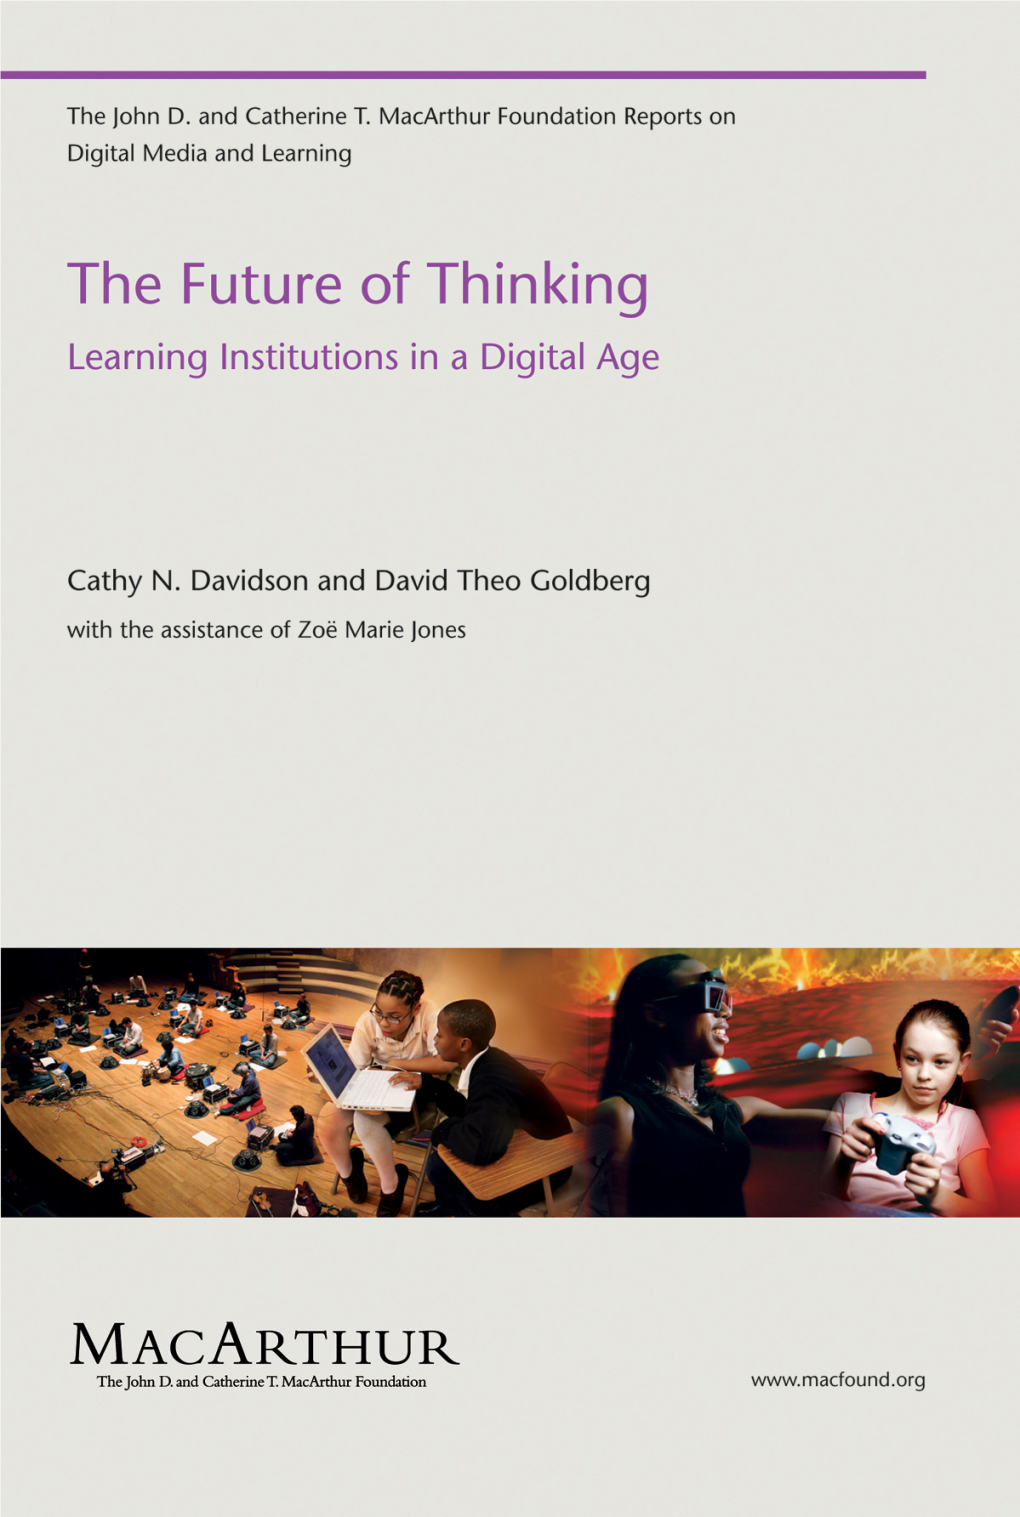 The Future of Thinking: Learning Institutions in a Digital Age by Cathy N